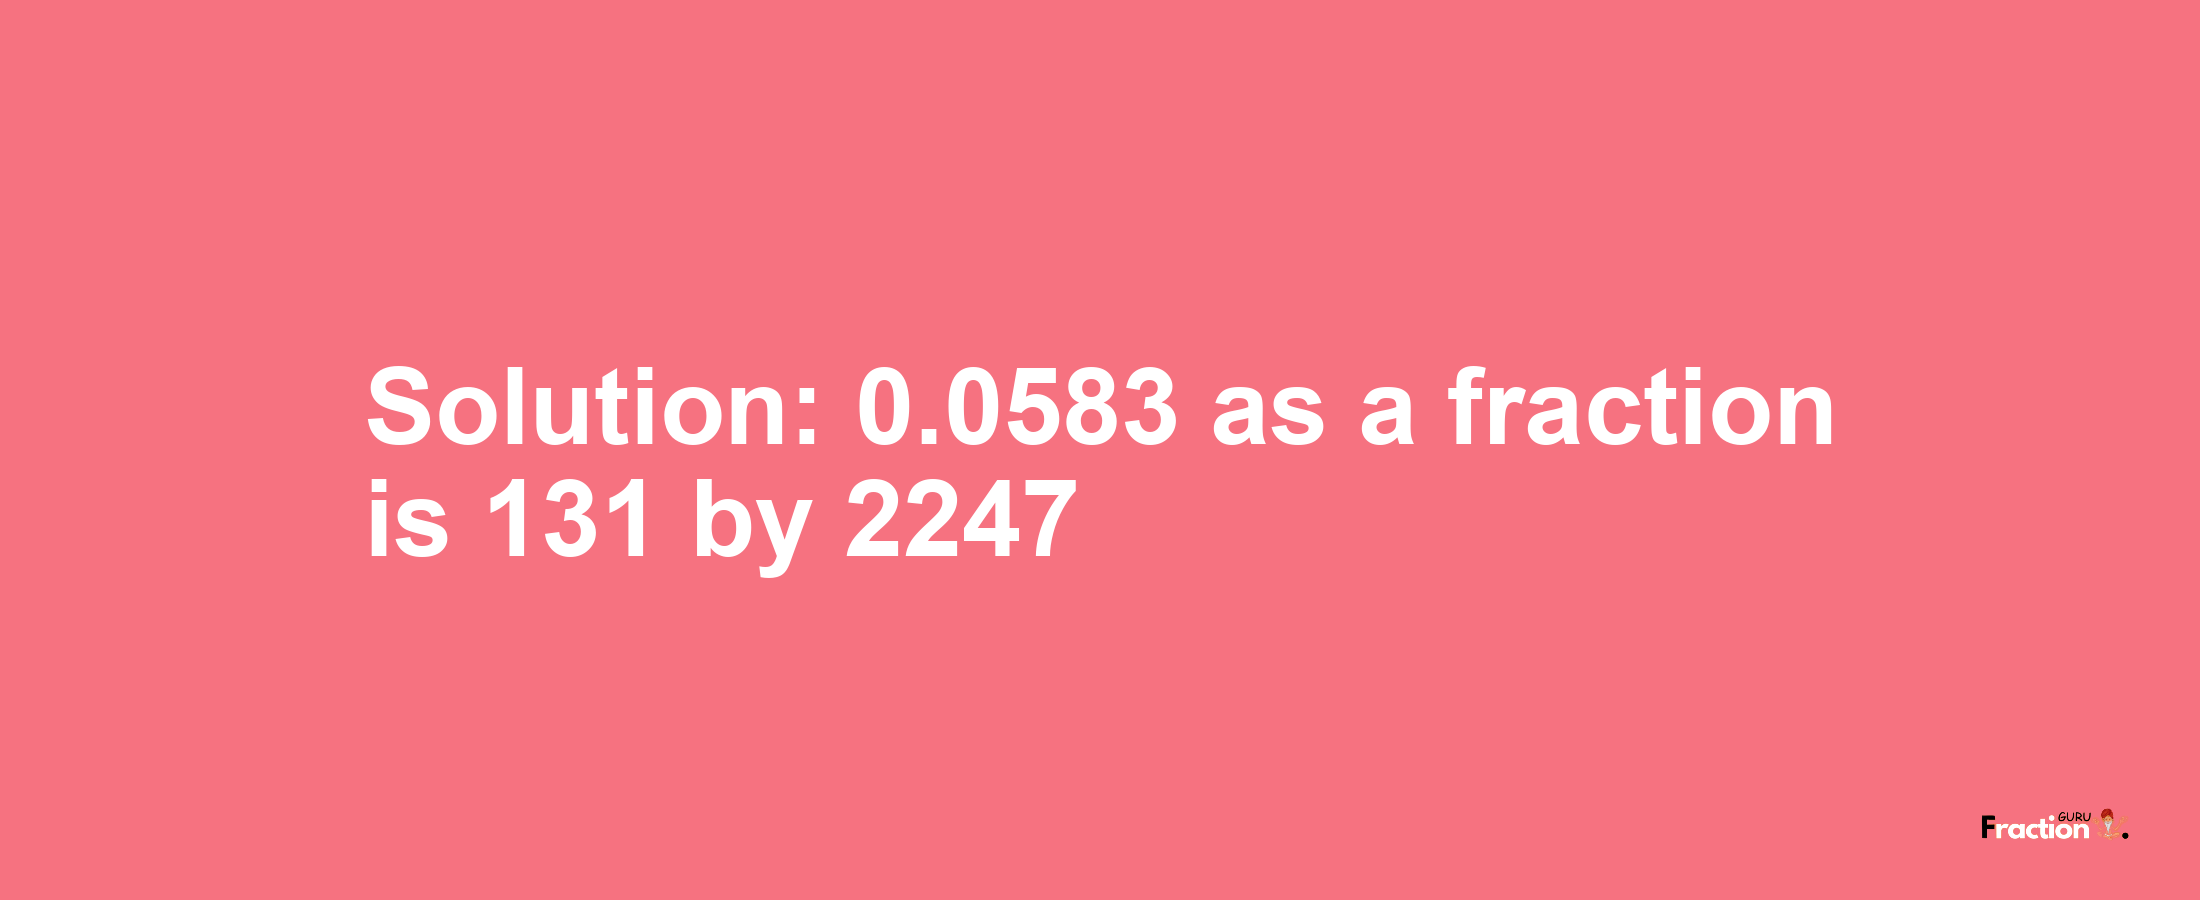 Solution:0.0583 as a fraction is 131/2247